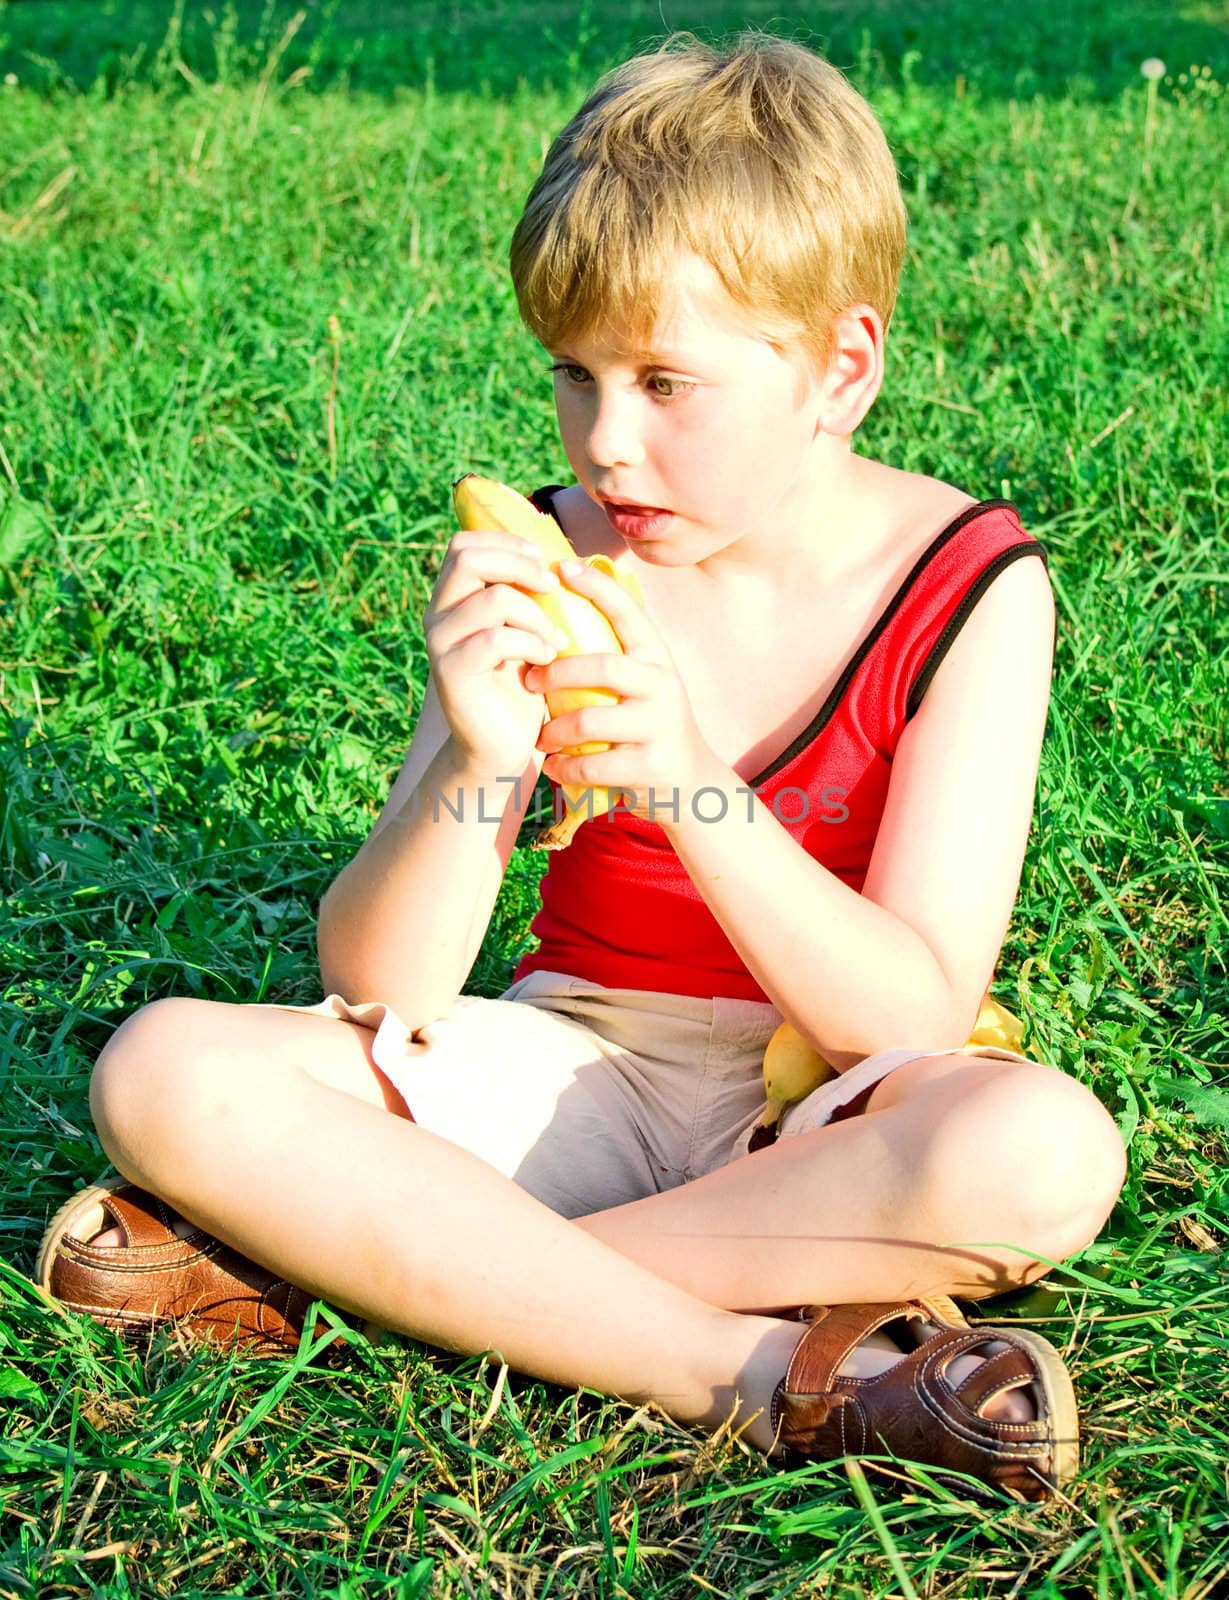 The little boy sits on a green grass and eats a ripe yellow banana